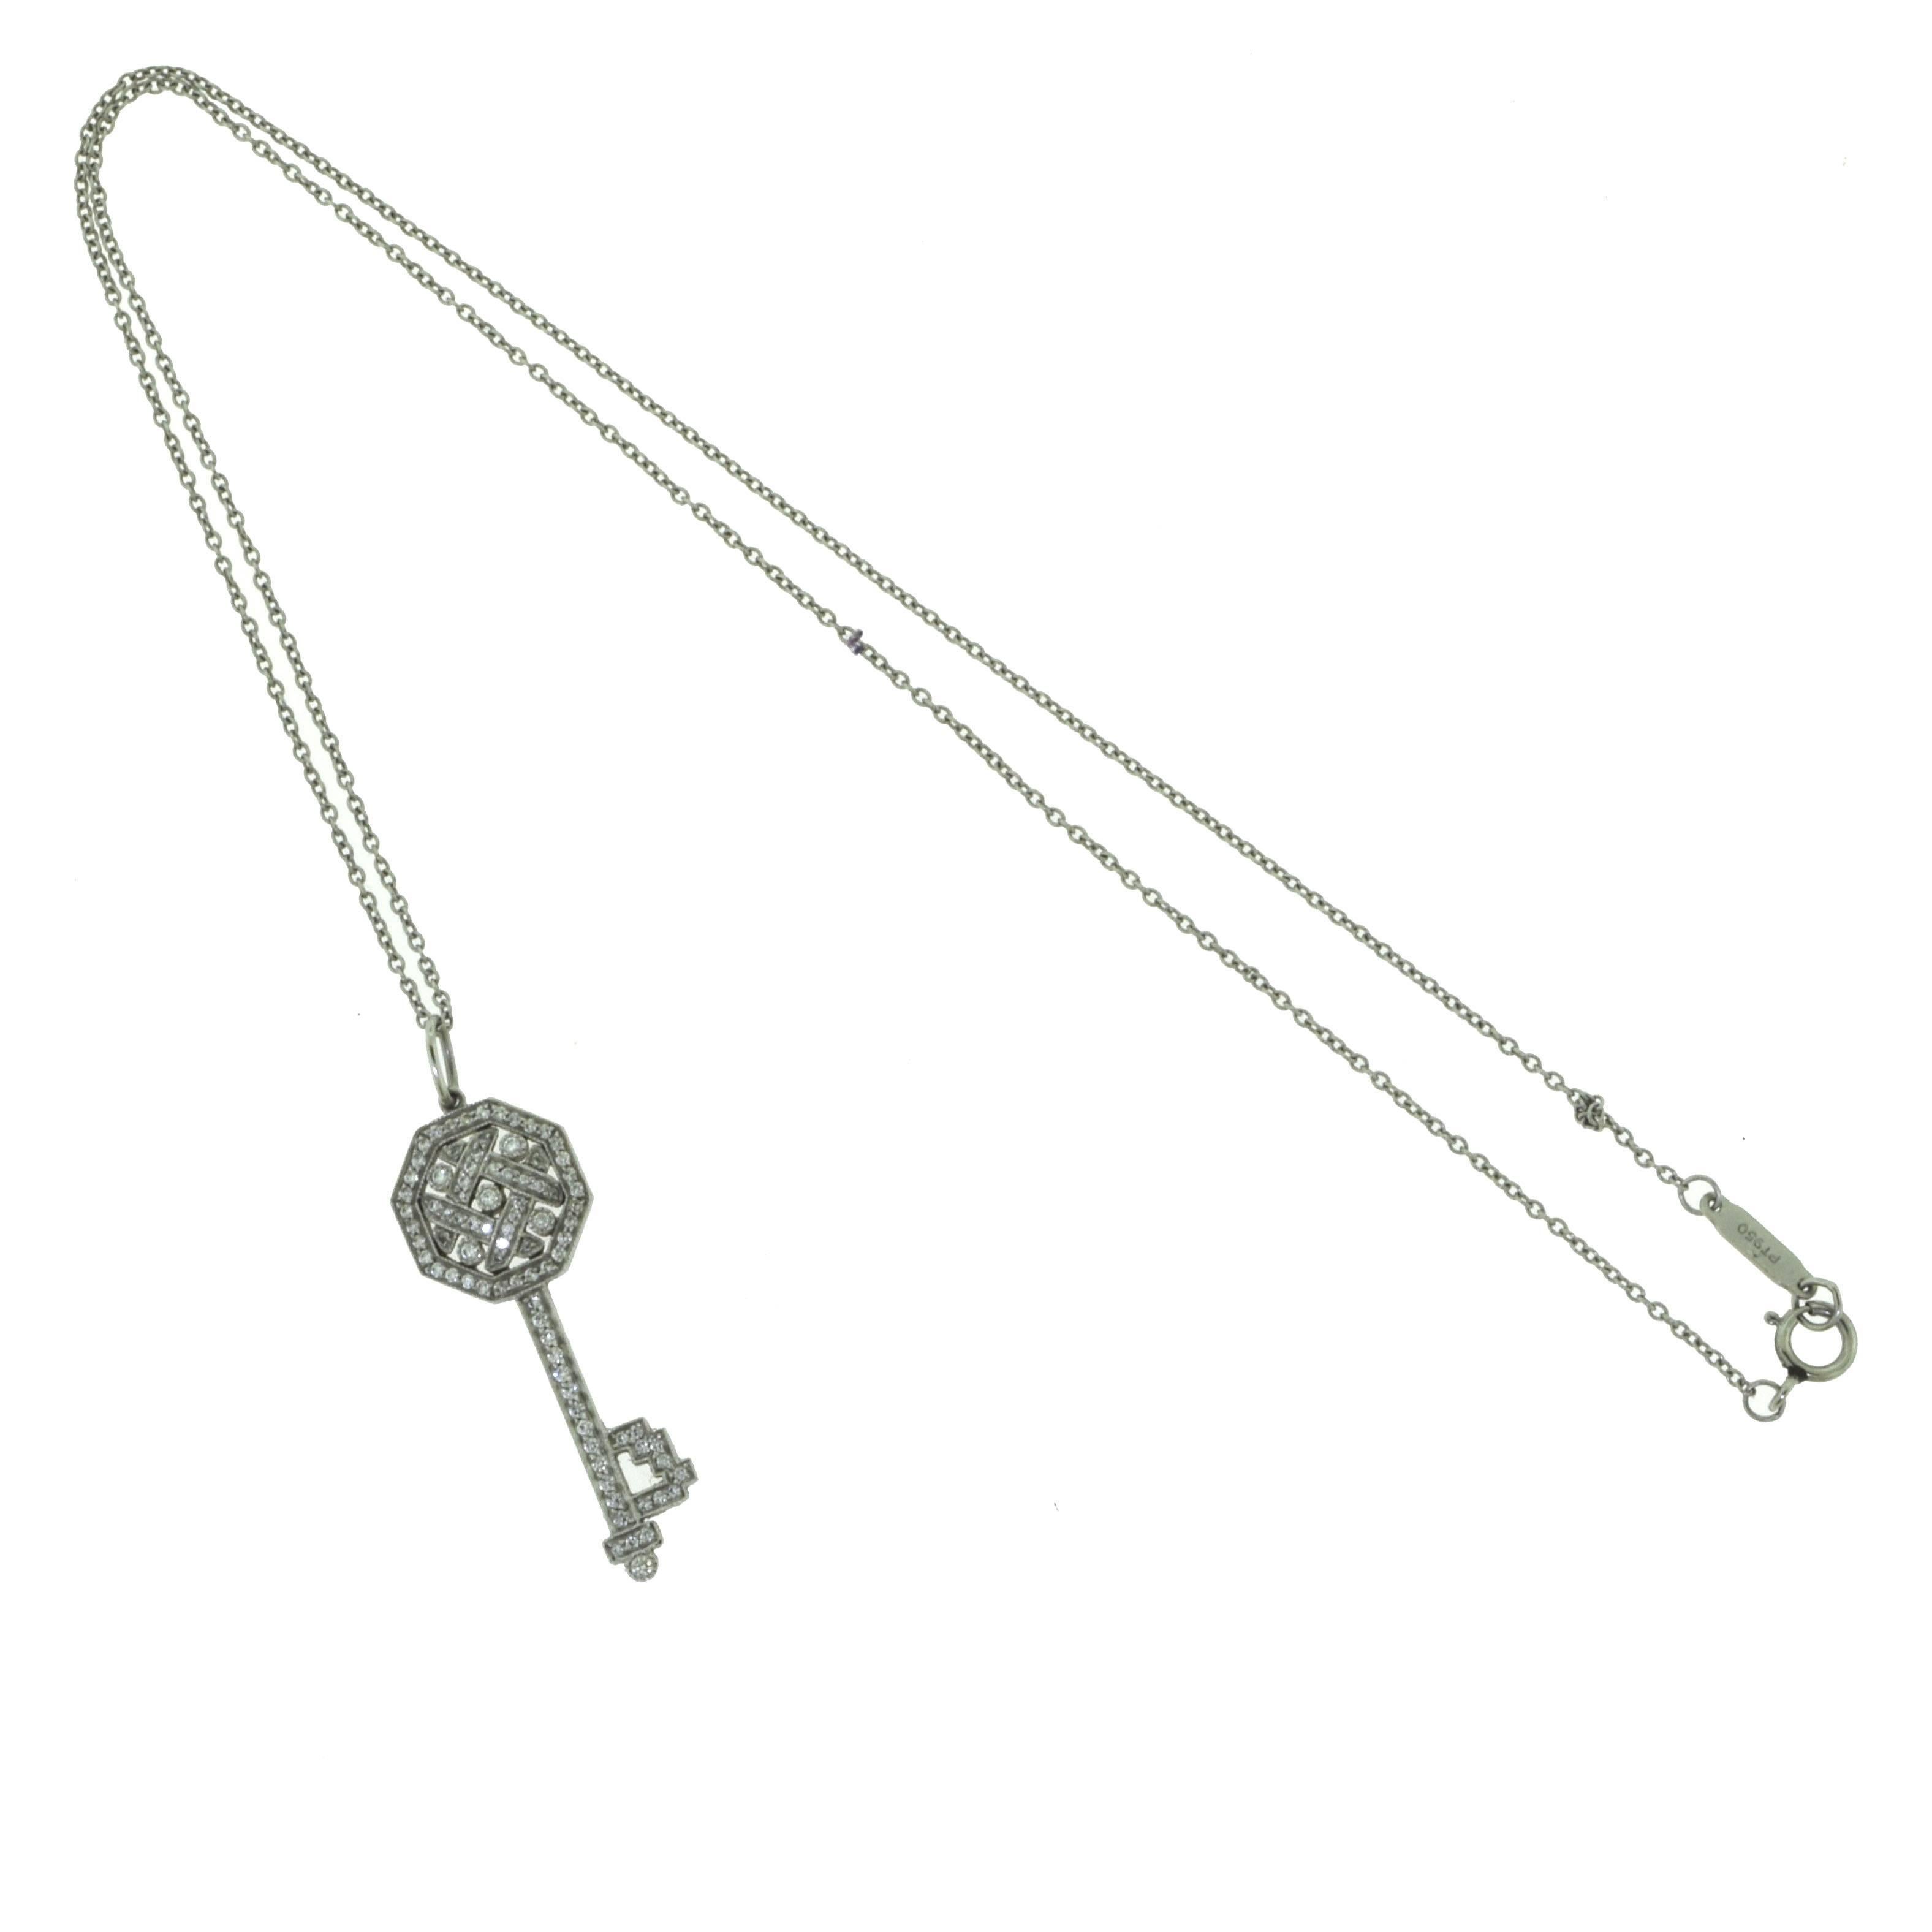 Designer: Tiffany & Co.
Collection: Tiffany Keys
Metal: Platinum
Stones: Round Brilliant Diamonds
Total Item Weight (g): 6.3
Chain Length: 18 inches
Key Dimensions: 1.25 inches (length) x 0.5 inches (width)
Hallmarks: Tiffany & Co. PT 950
Estimated